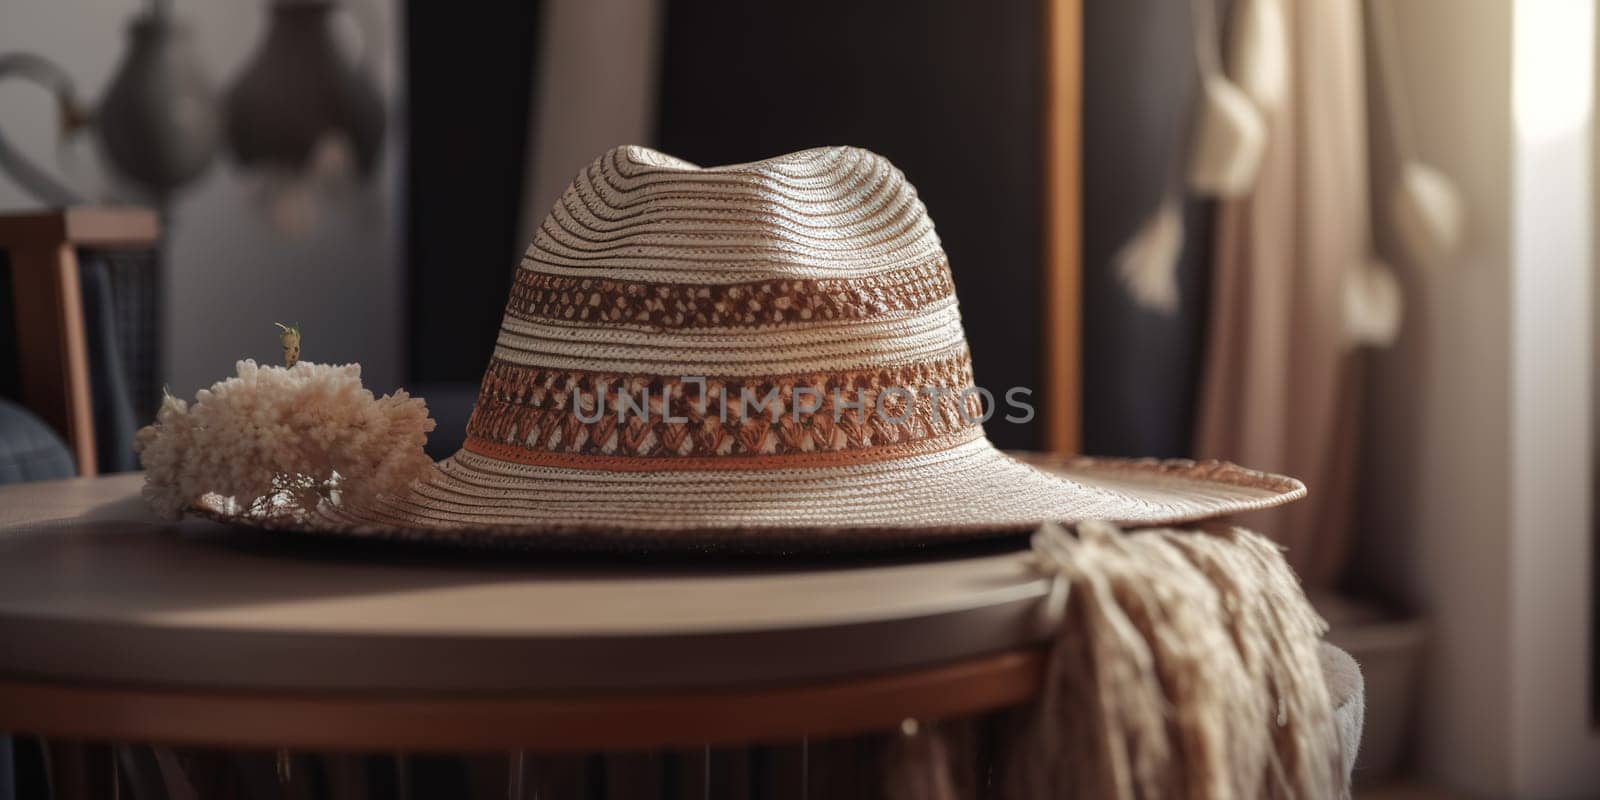 Stylish straw women's hat sits on table in room.